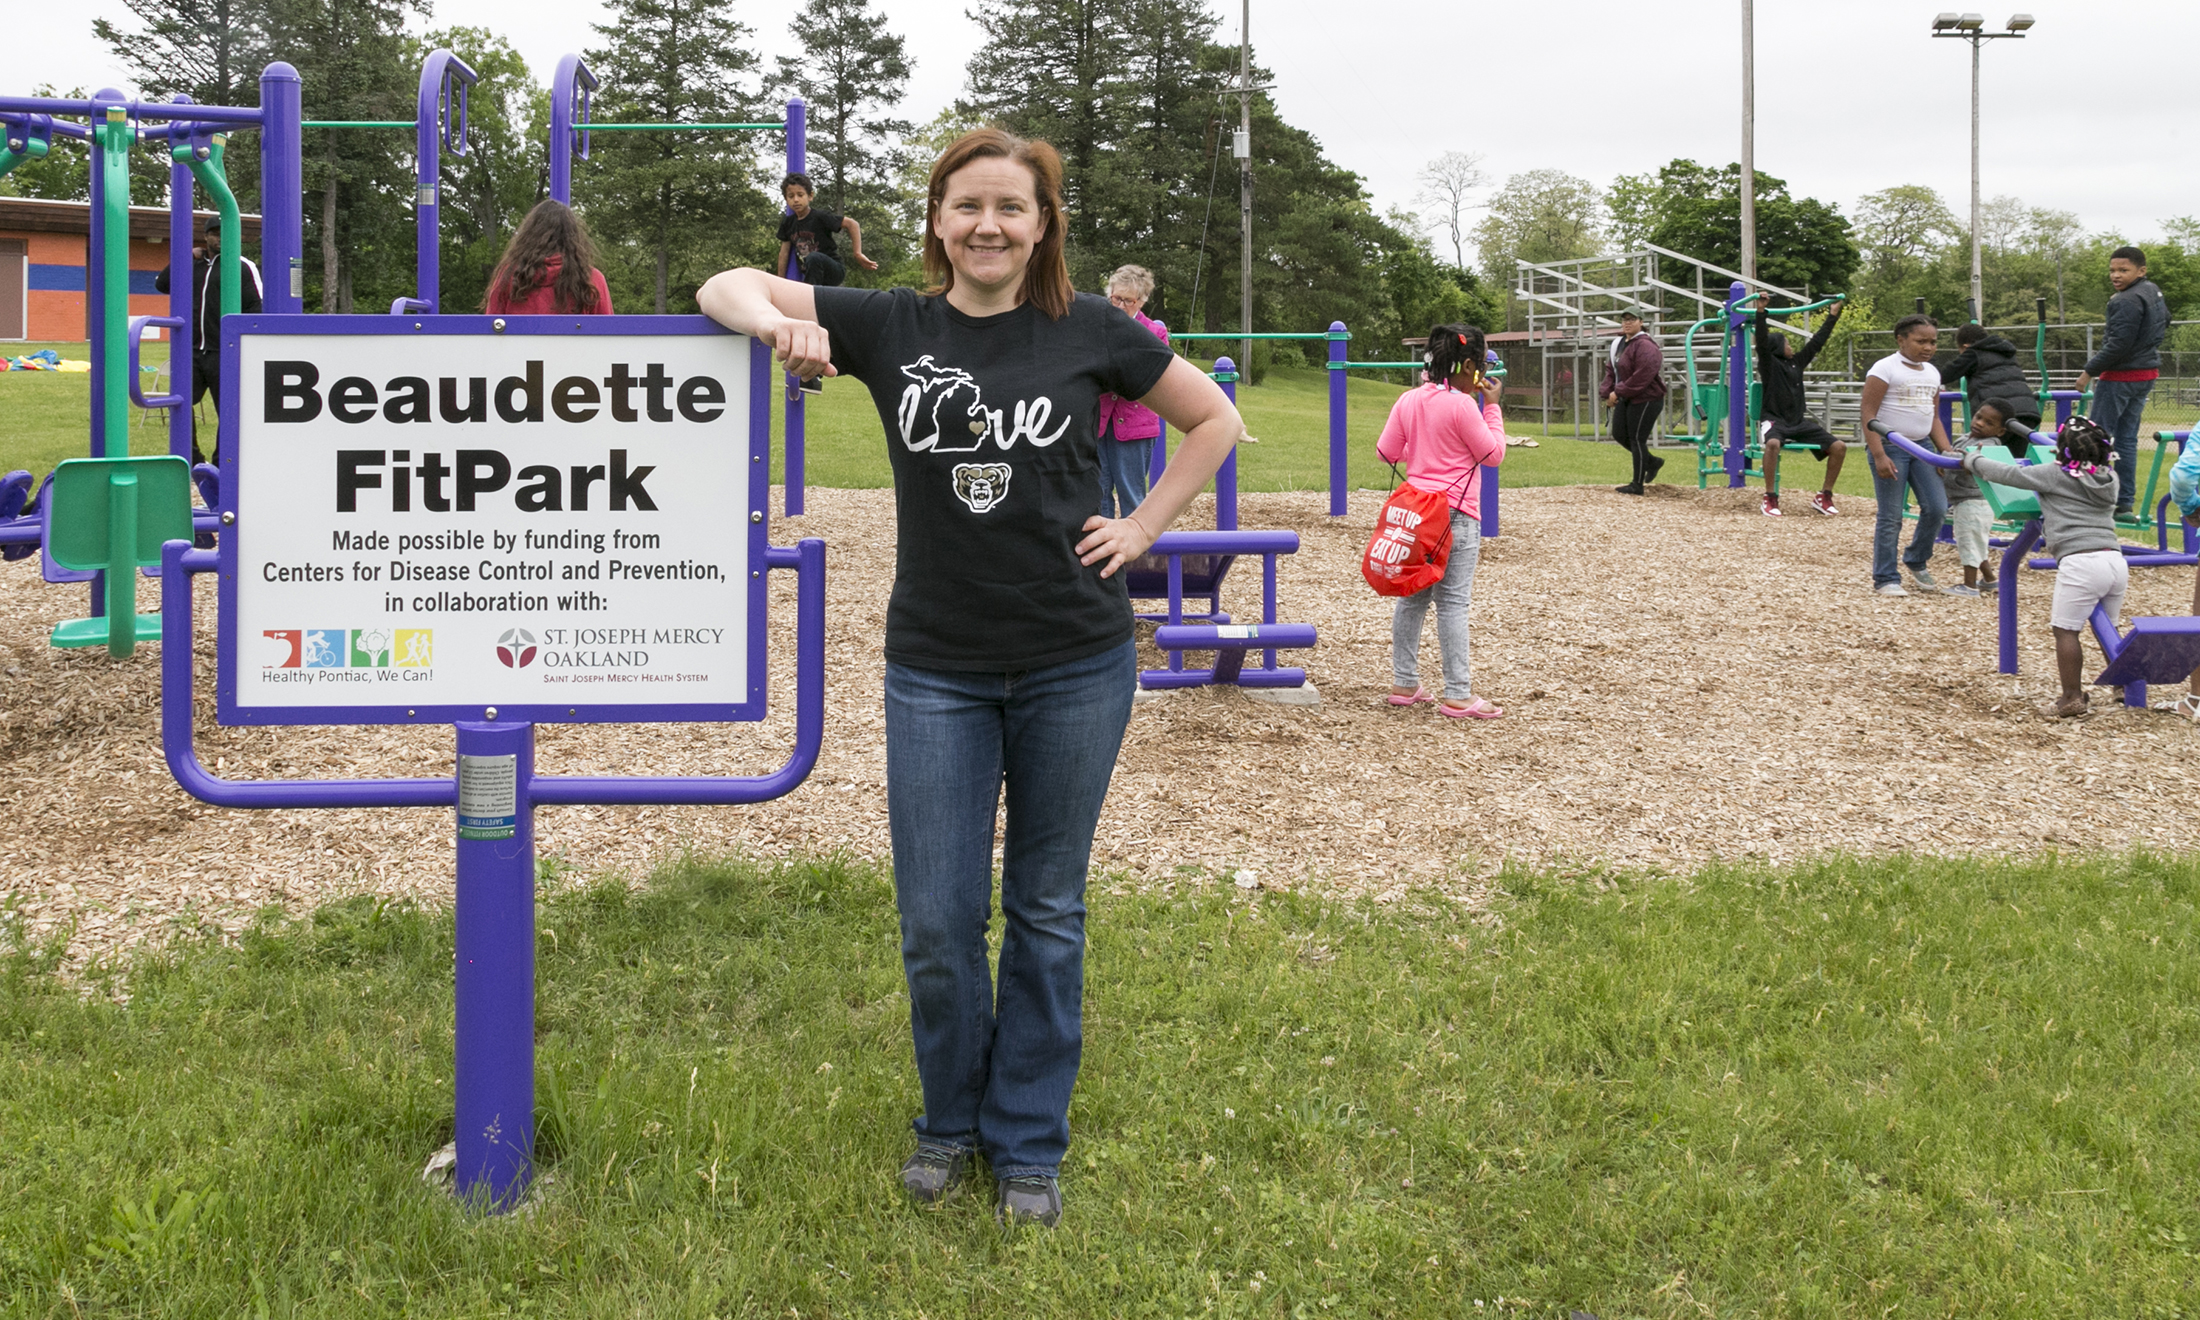 A woman standing next to . sign in front of a children's park